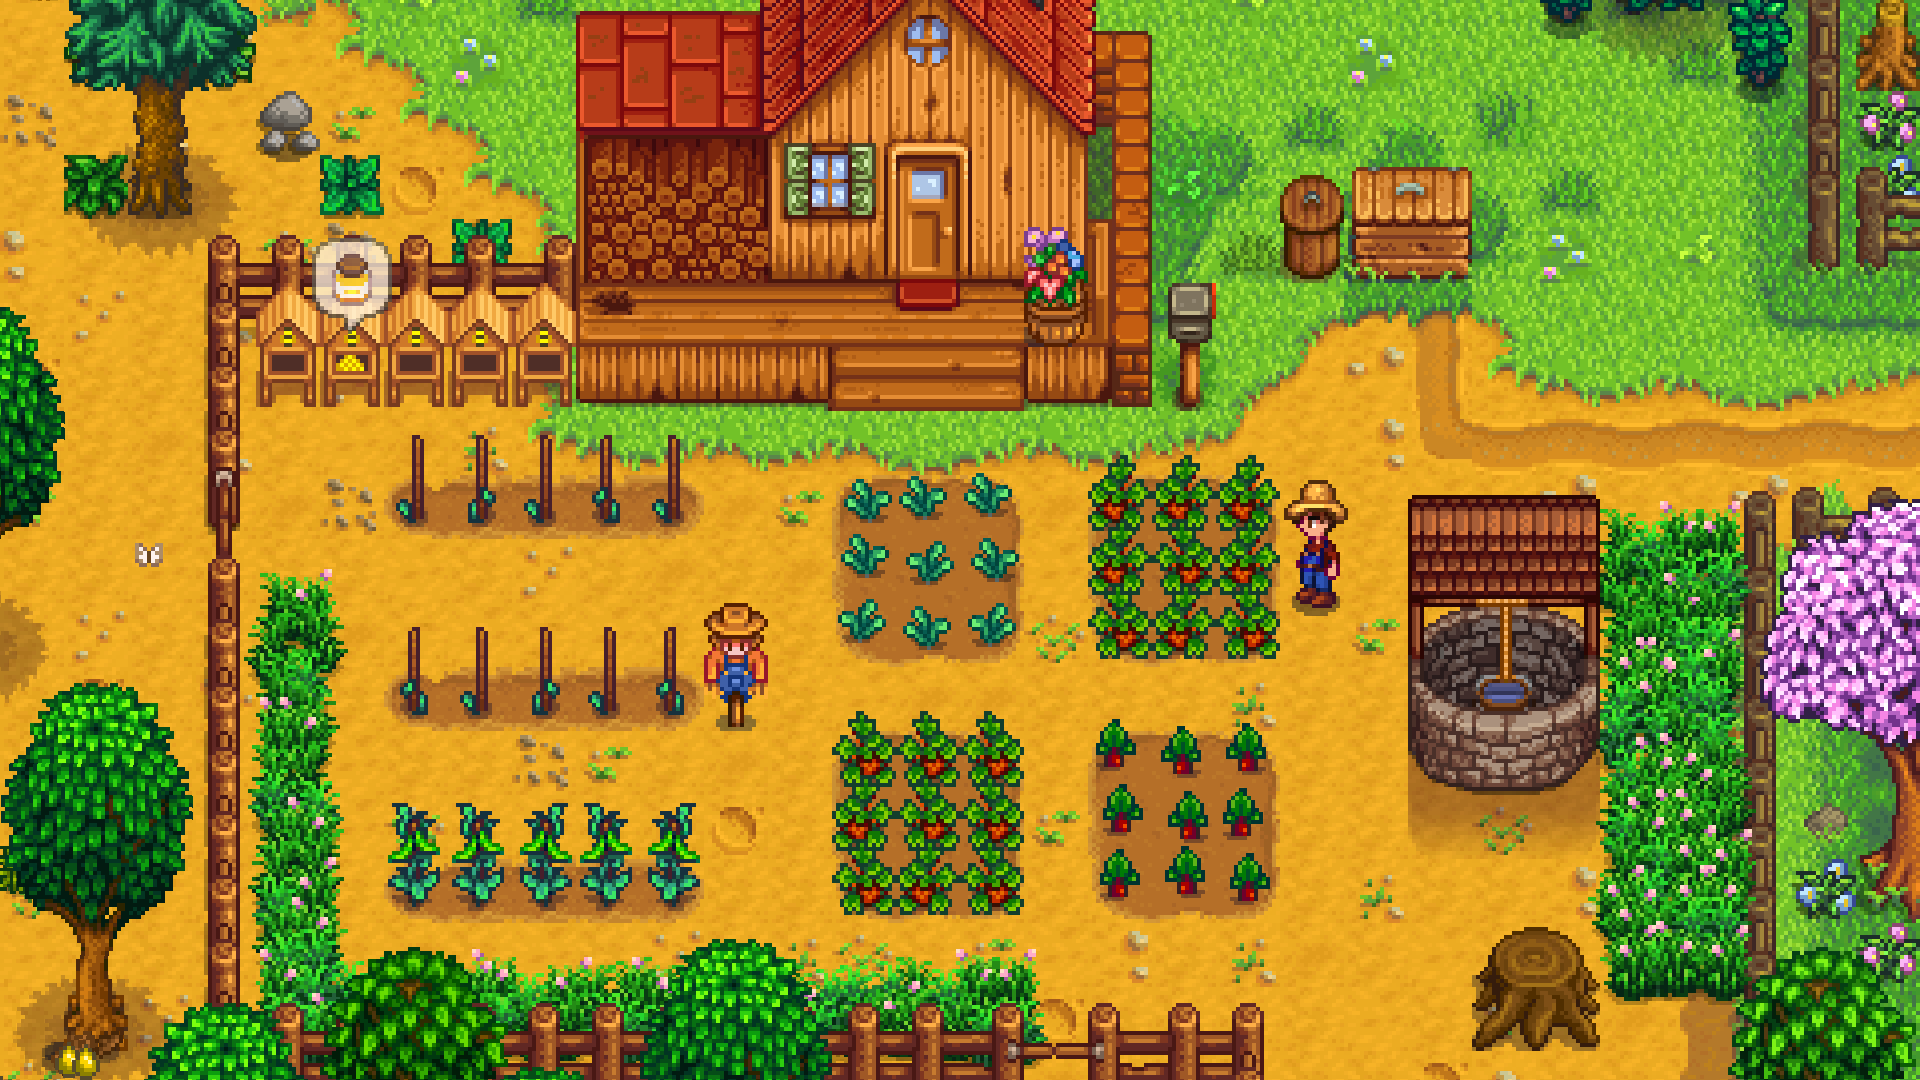 Amazing Stardew Valley Pictures & Backgrounds